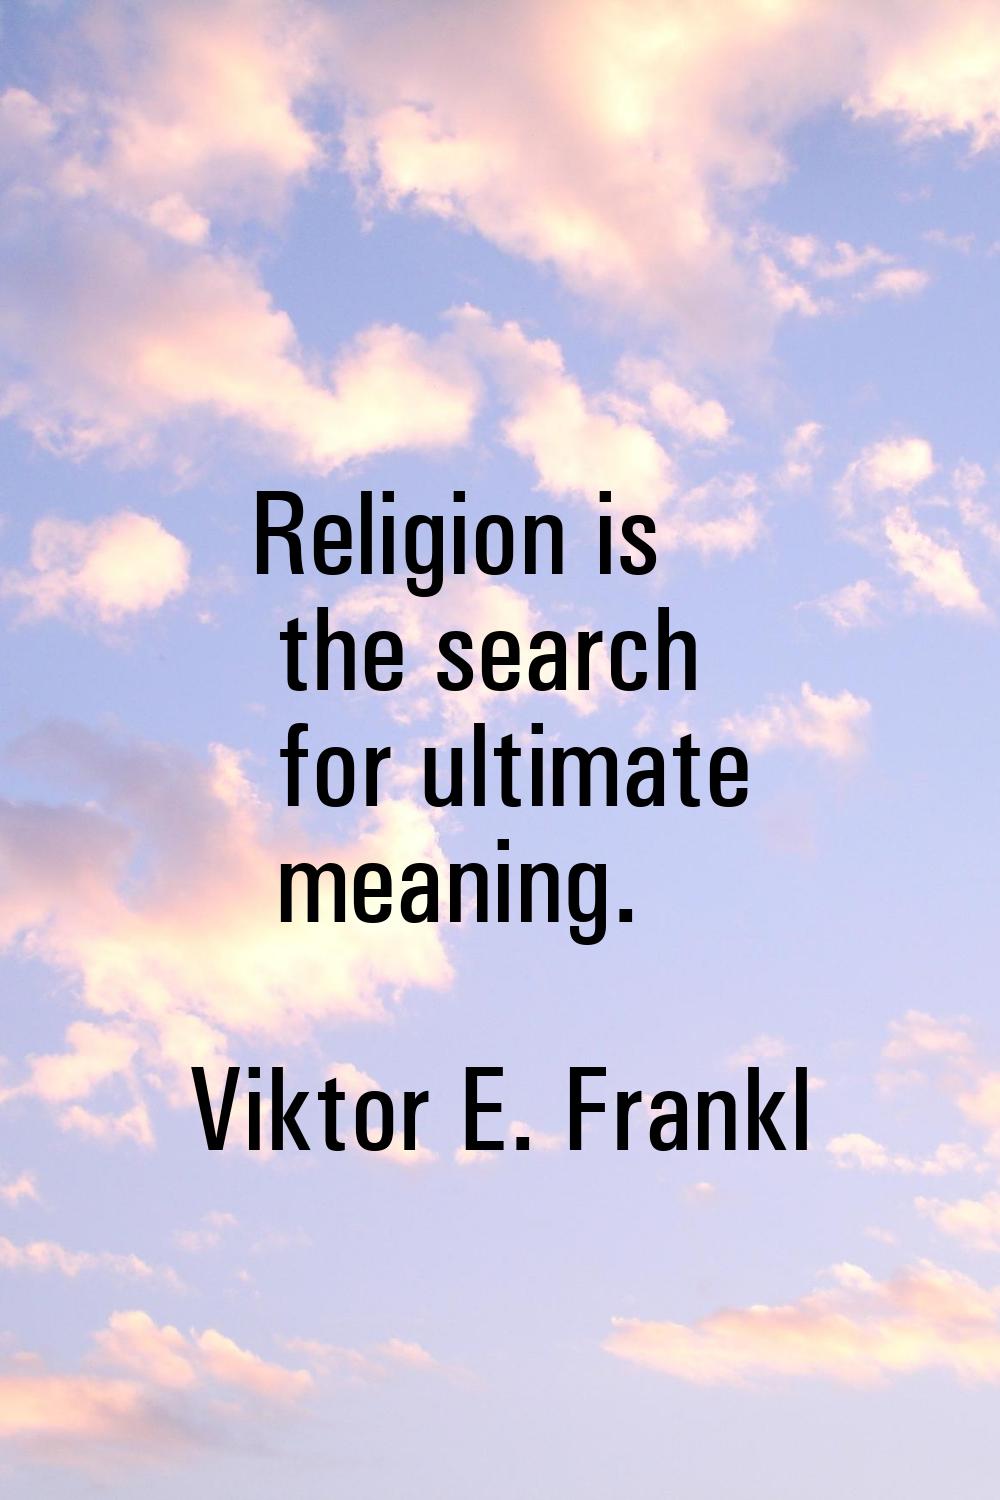 Religion is the search for ultimate meaning.